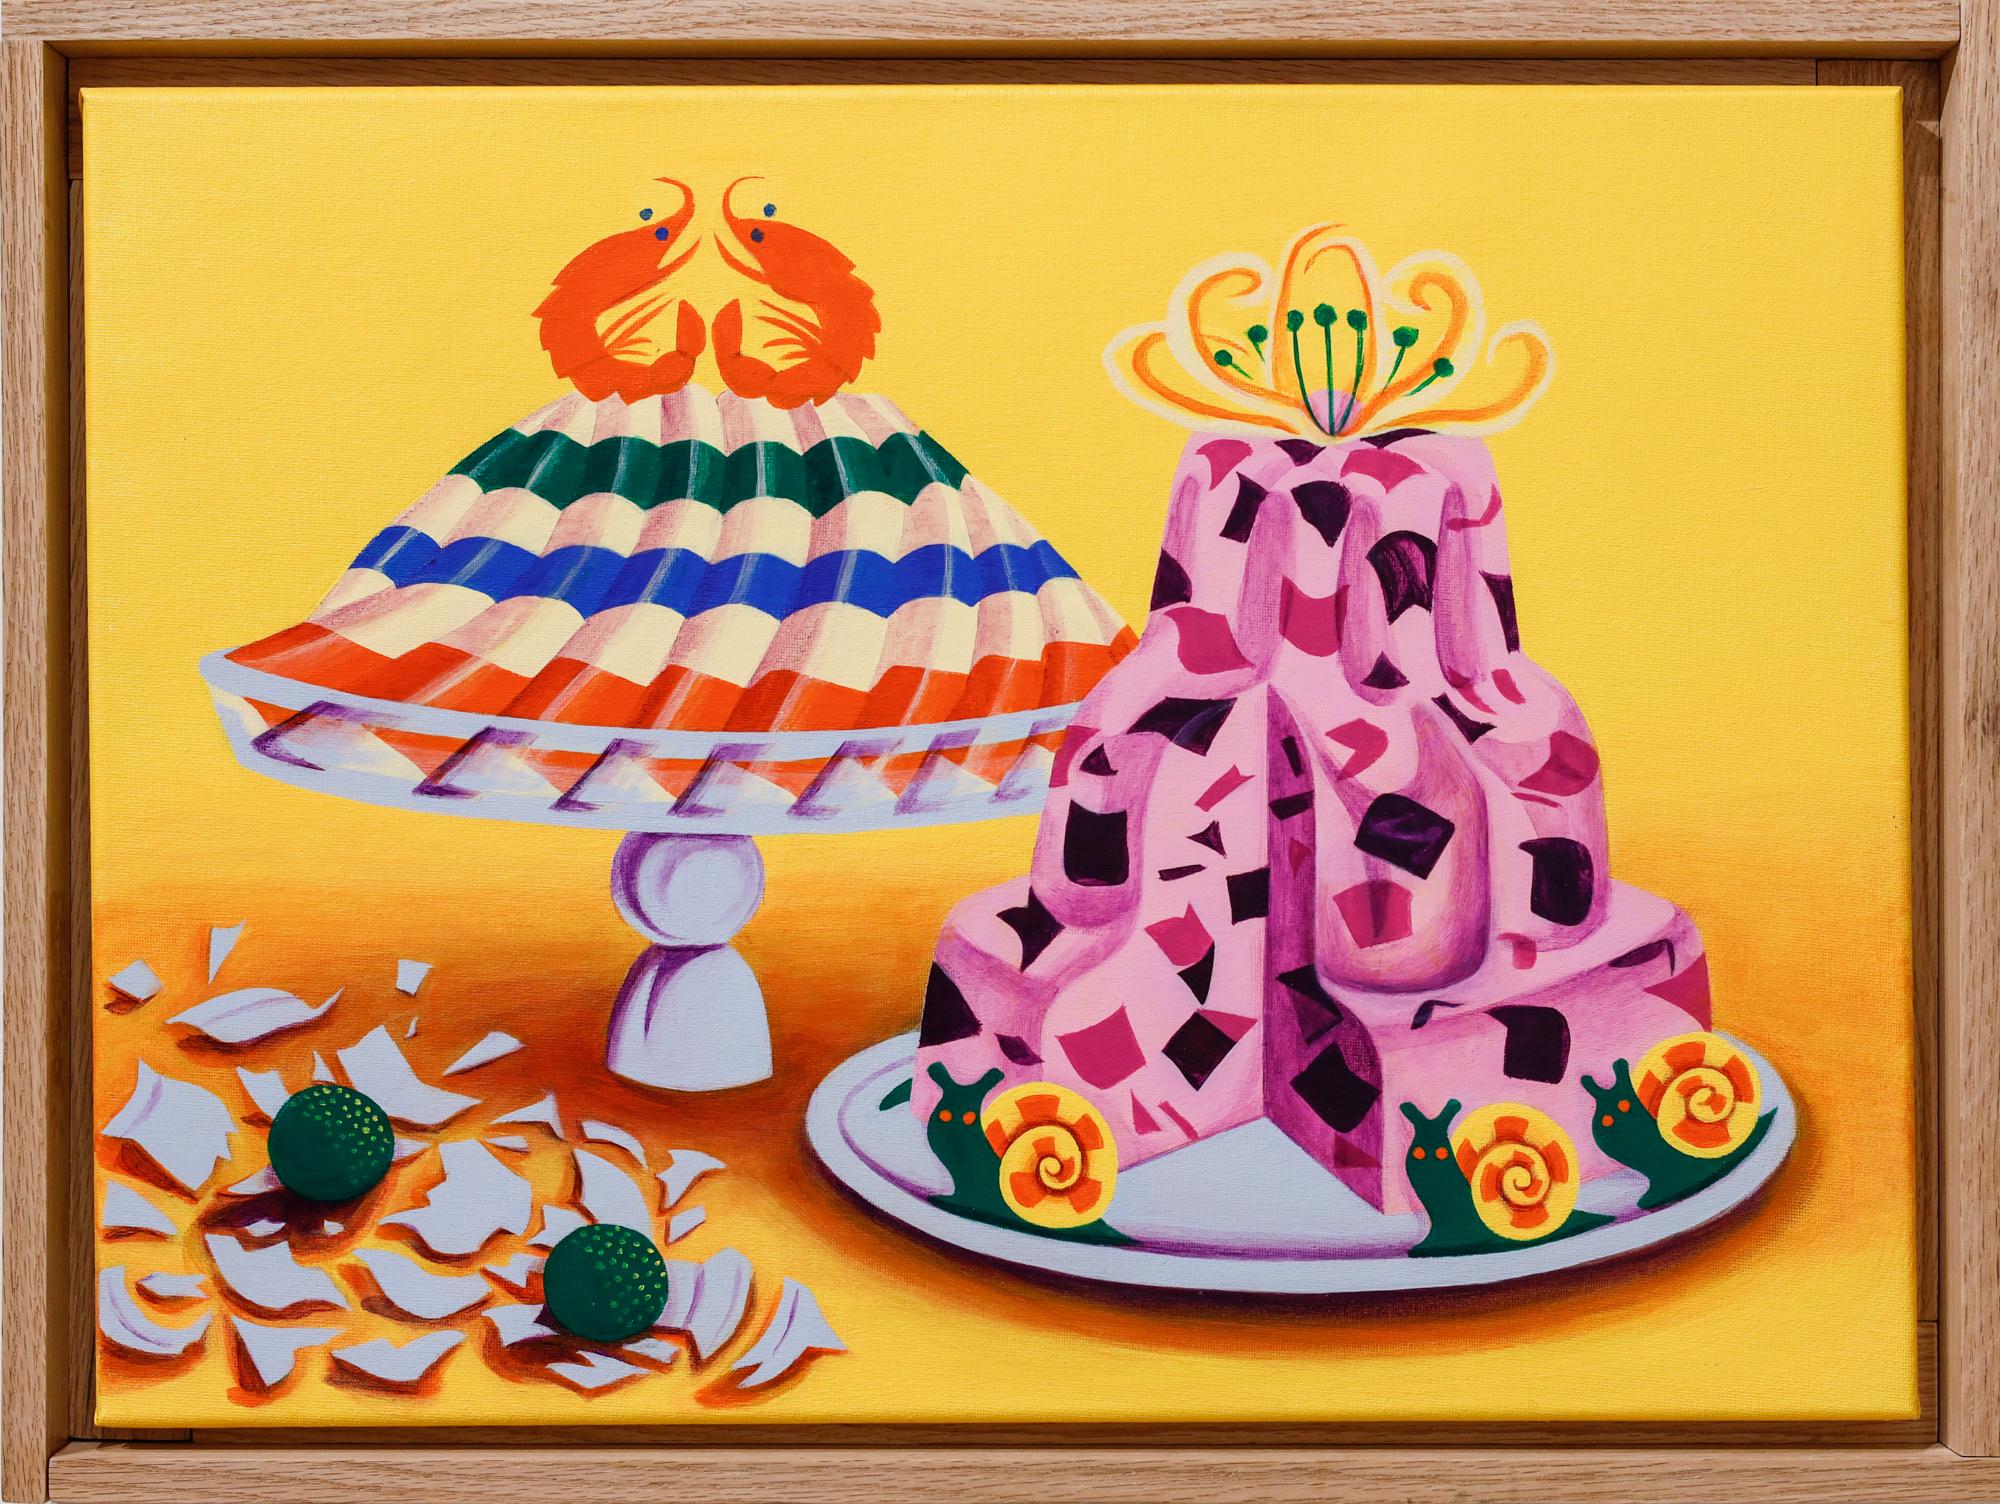 "Delight or Disgust" Jell-o motif, images of food, glassware - Painting by Angela Rio